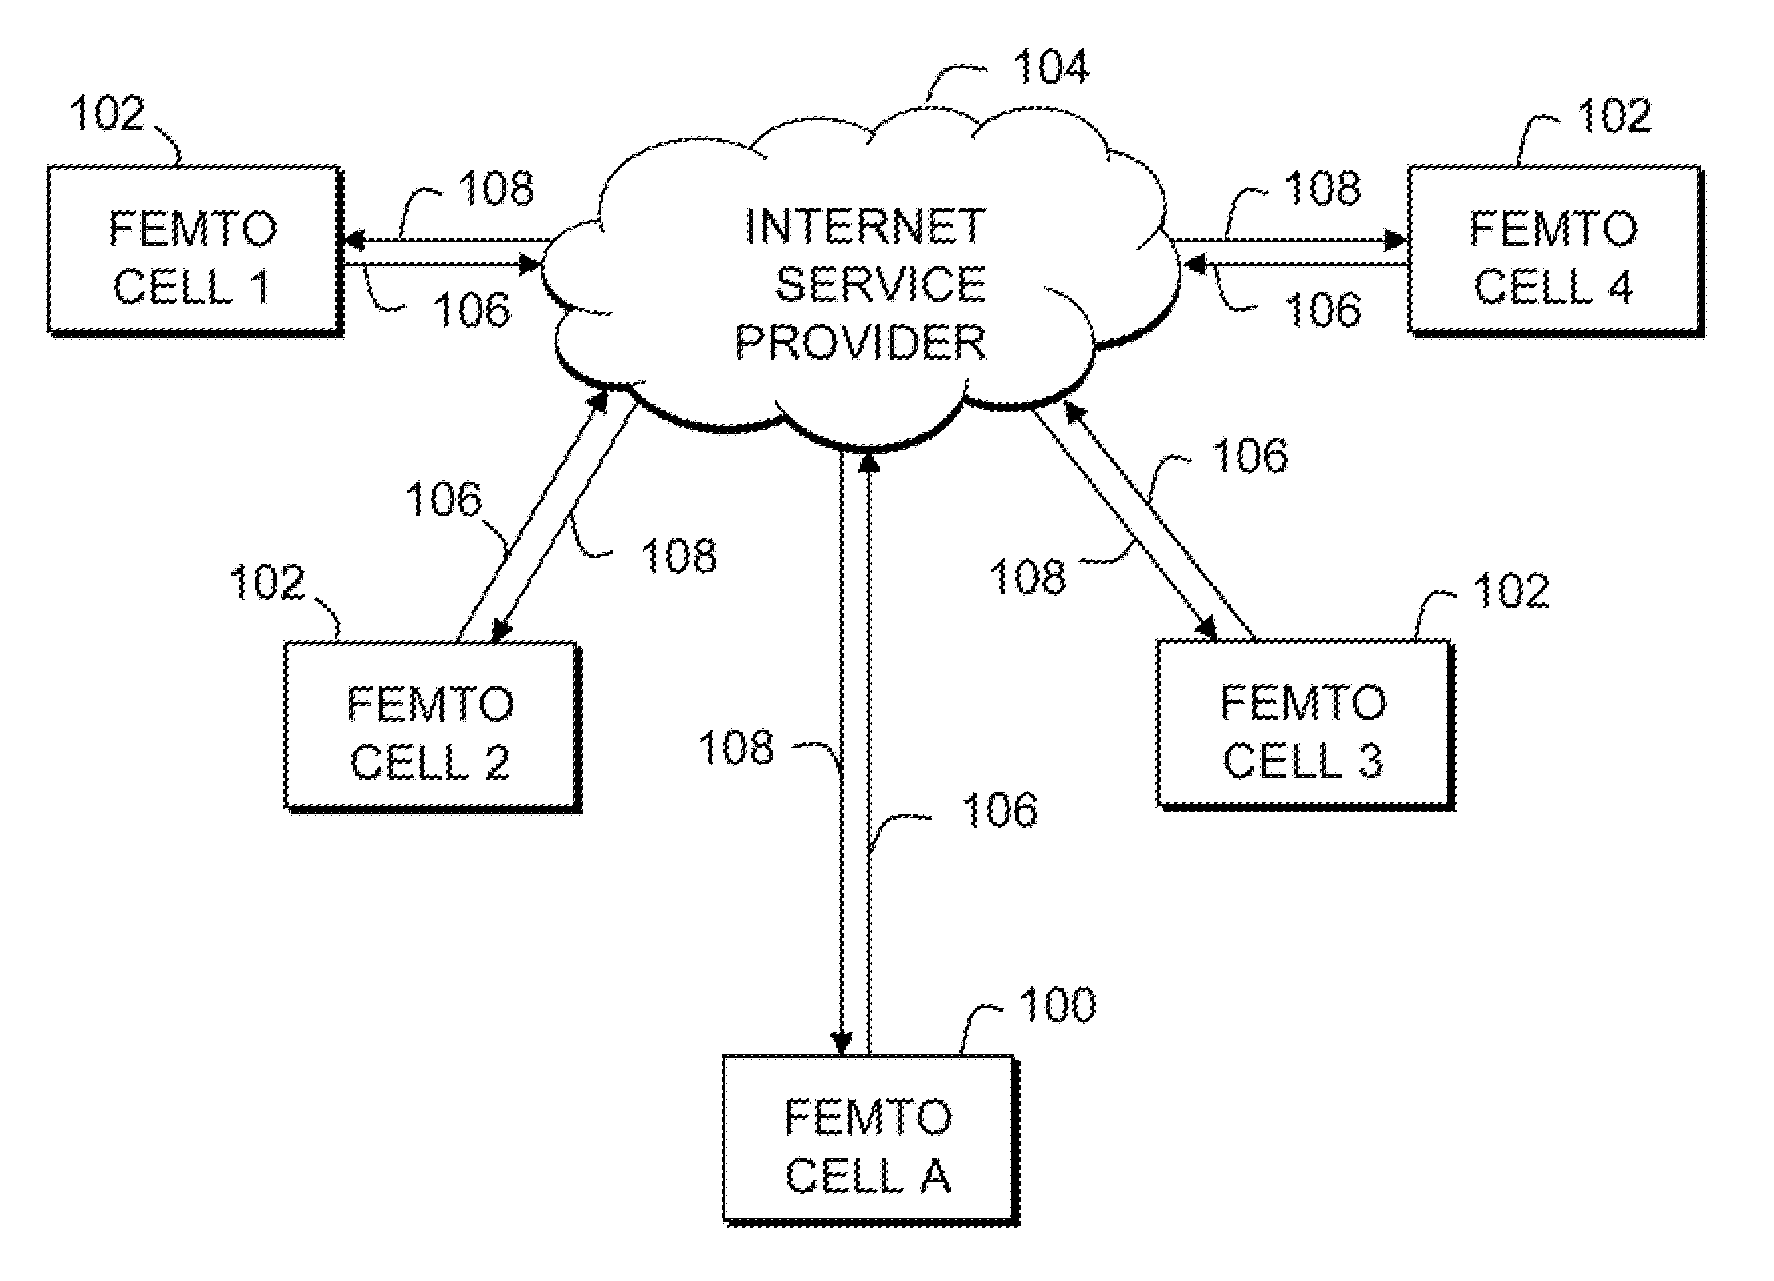 Available backhaul bandwidth estimation in a femto-cell communication network